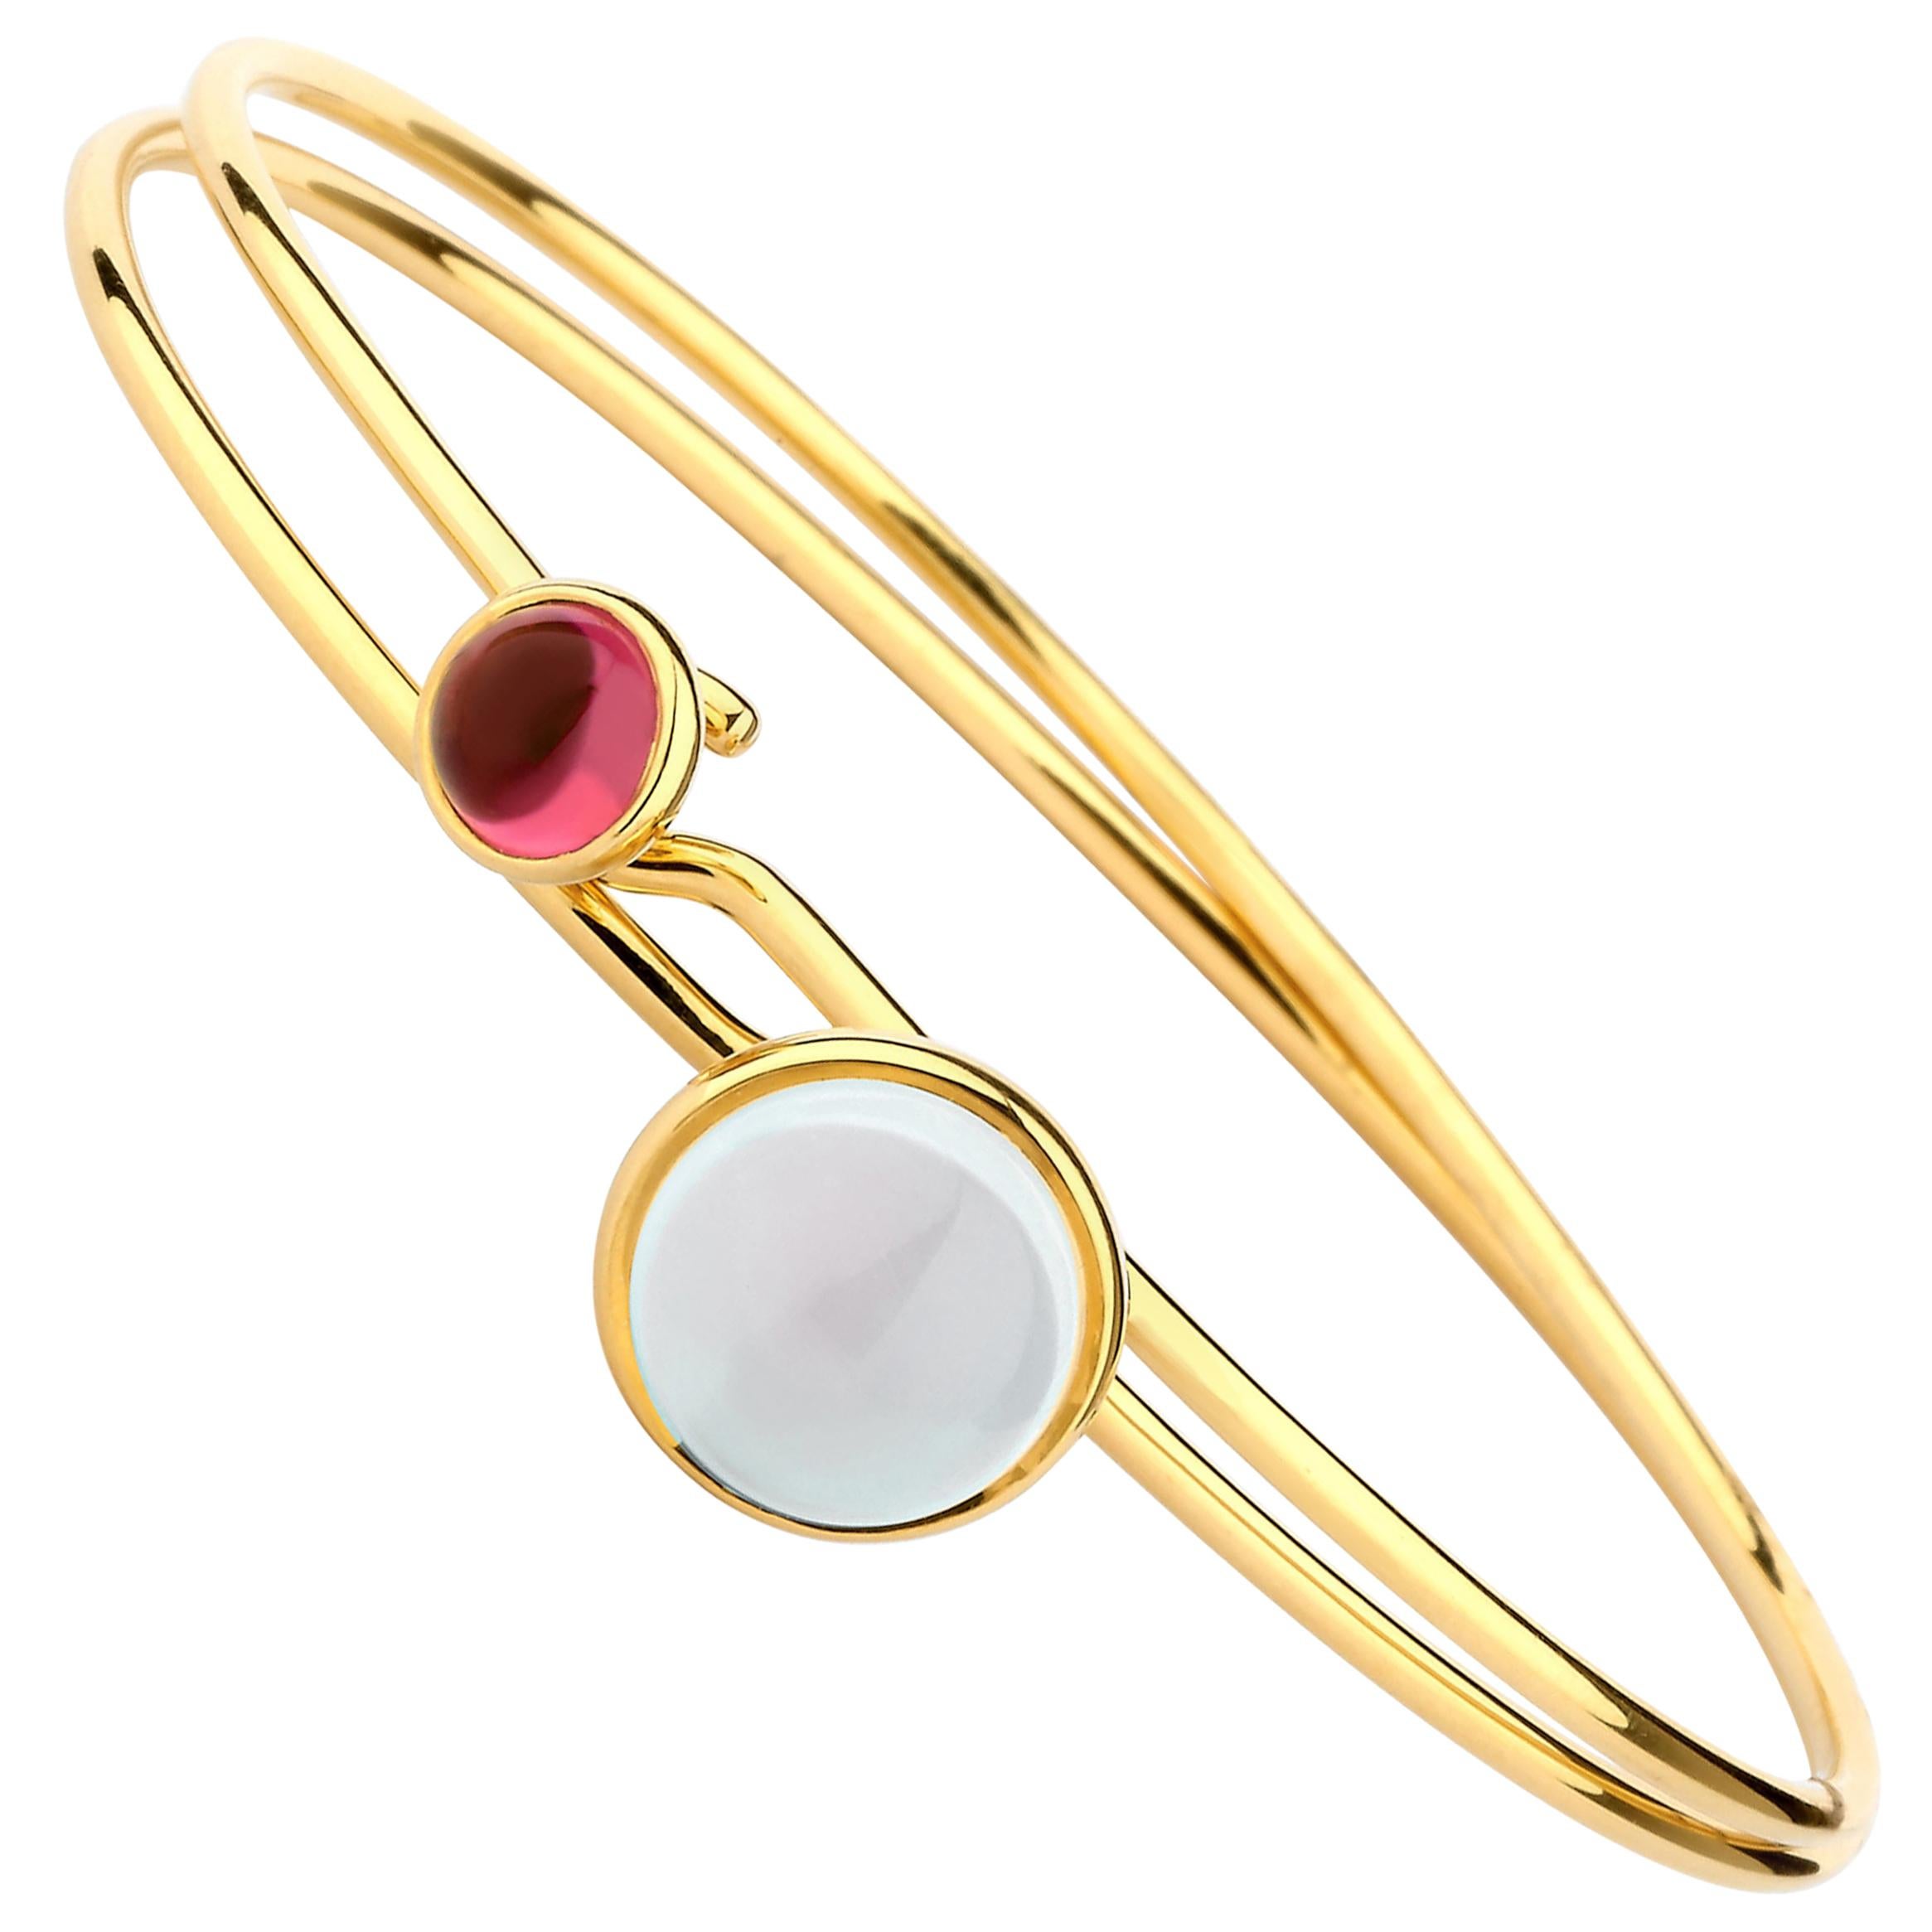 Syna Moon Quartz and Rubellite Yellow Gold Pair of Stacking Bracelets